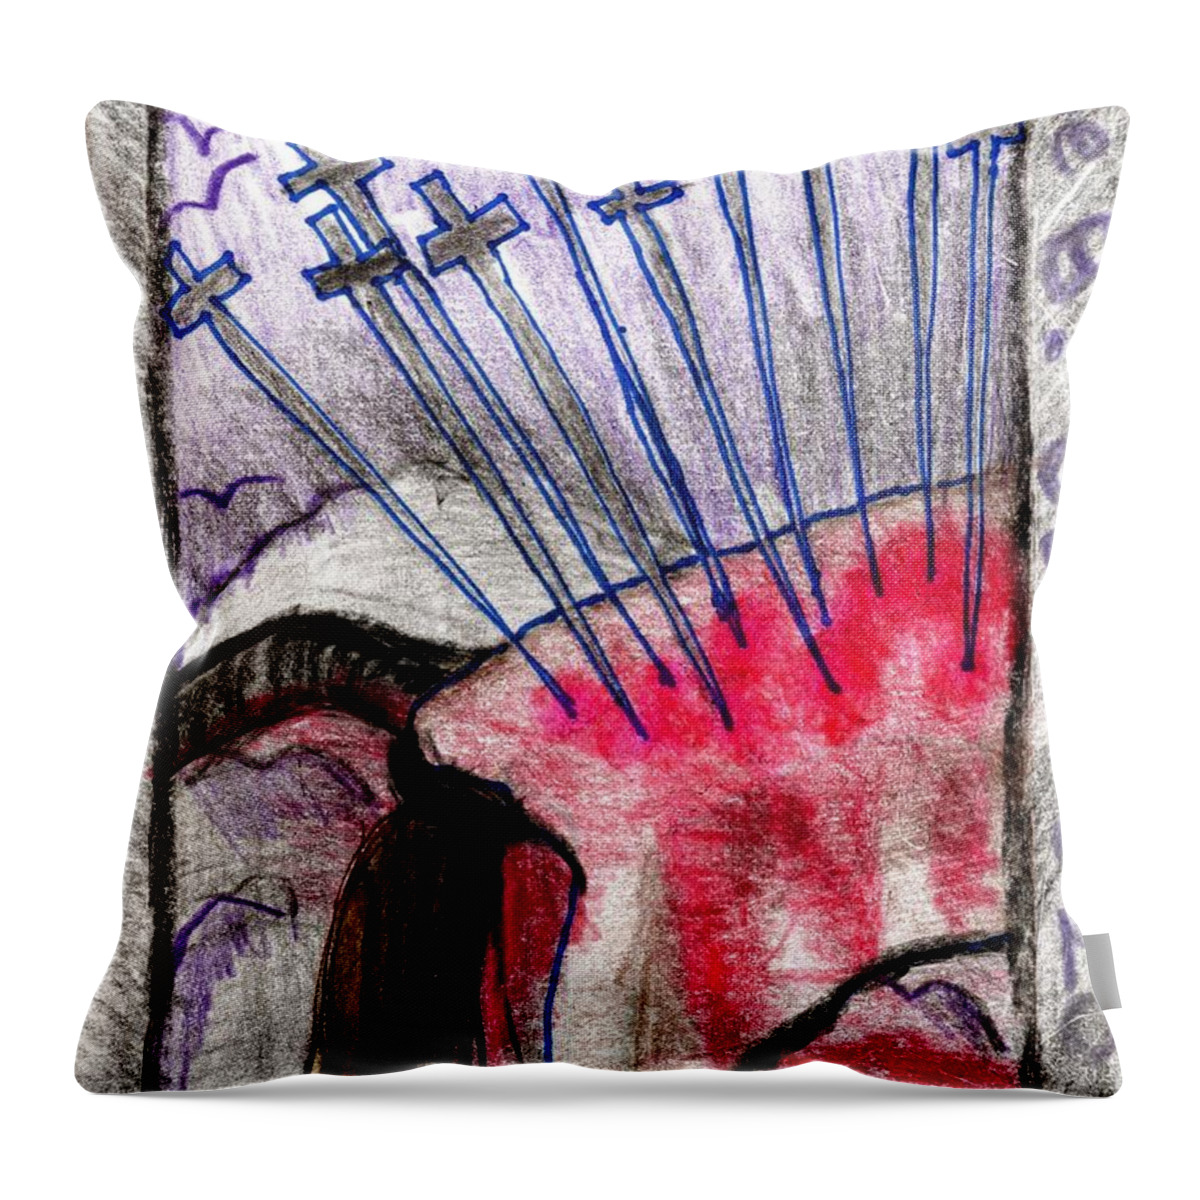 Tarot Throw Pillow featuring the drawing The Glowing Tarot Swords 10 by Sushila Burgess